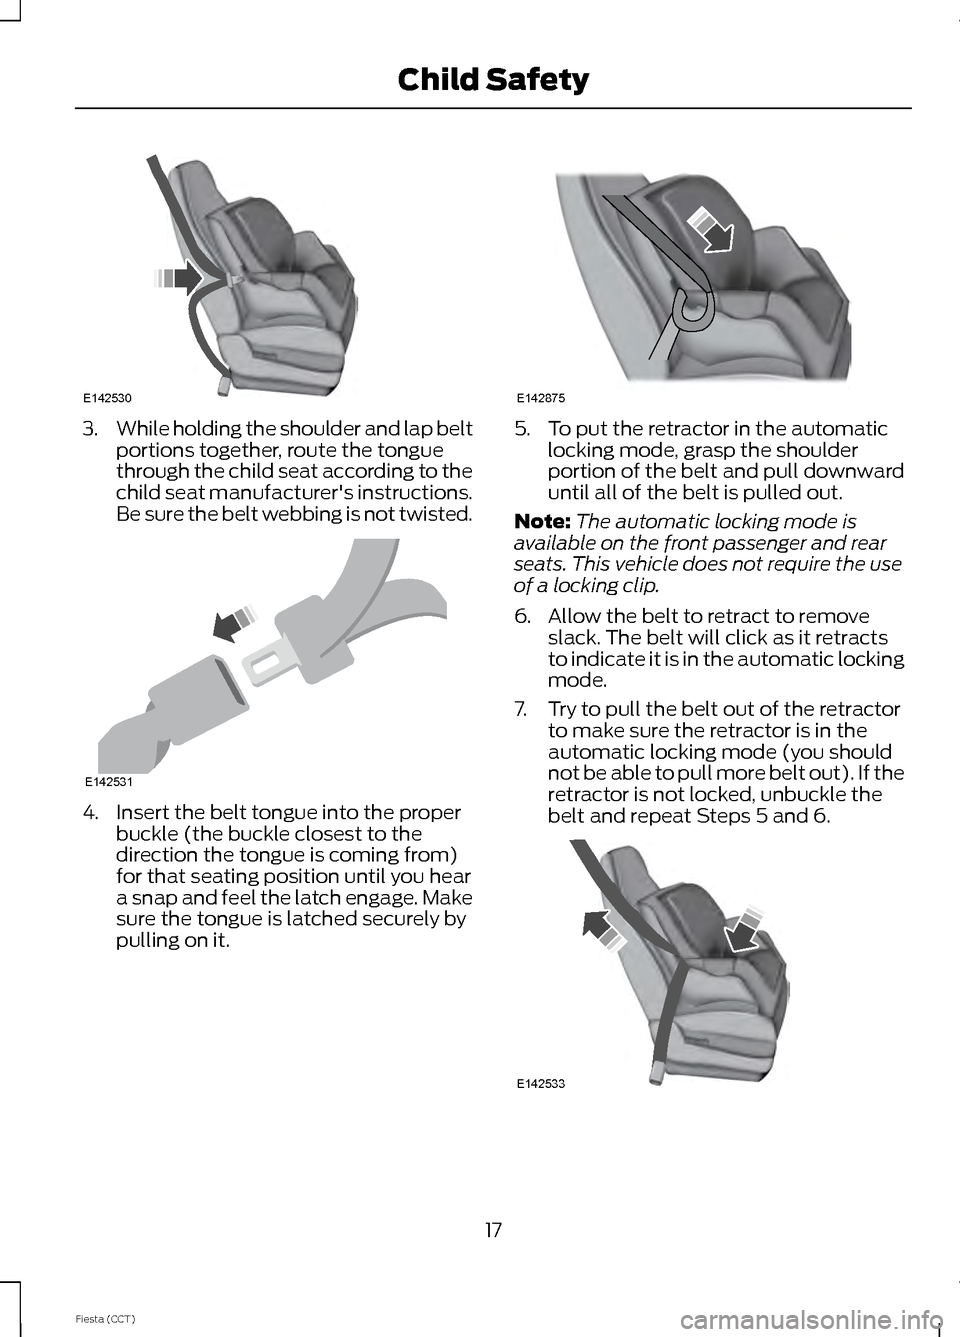 FORD FIESTA 2014 6.G User Guide 3.
While holding the shoulder and lap belt
portions together, route the tongue
through the child seat according to the
child seat manufacturers instructions.
Be sure the belt webbing is not twisted. 